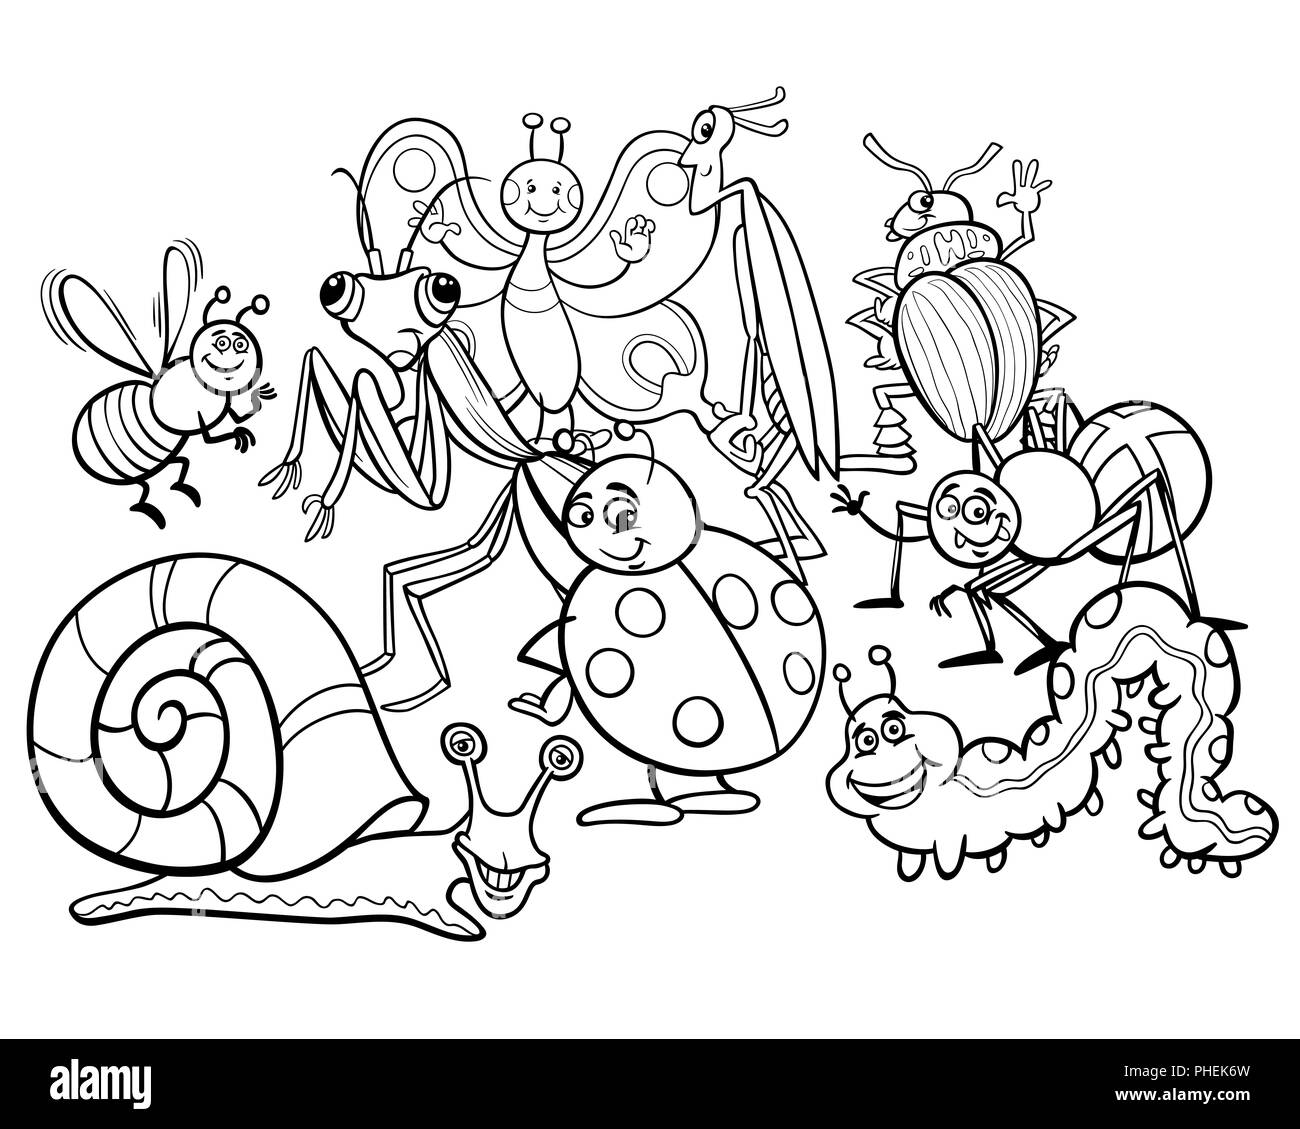 cartoon insects animal characters coloring book Stock Photo